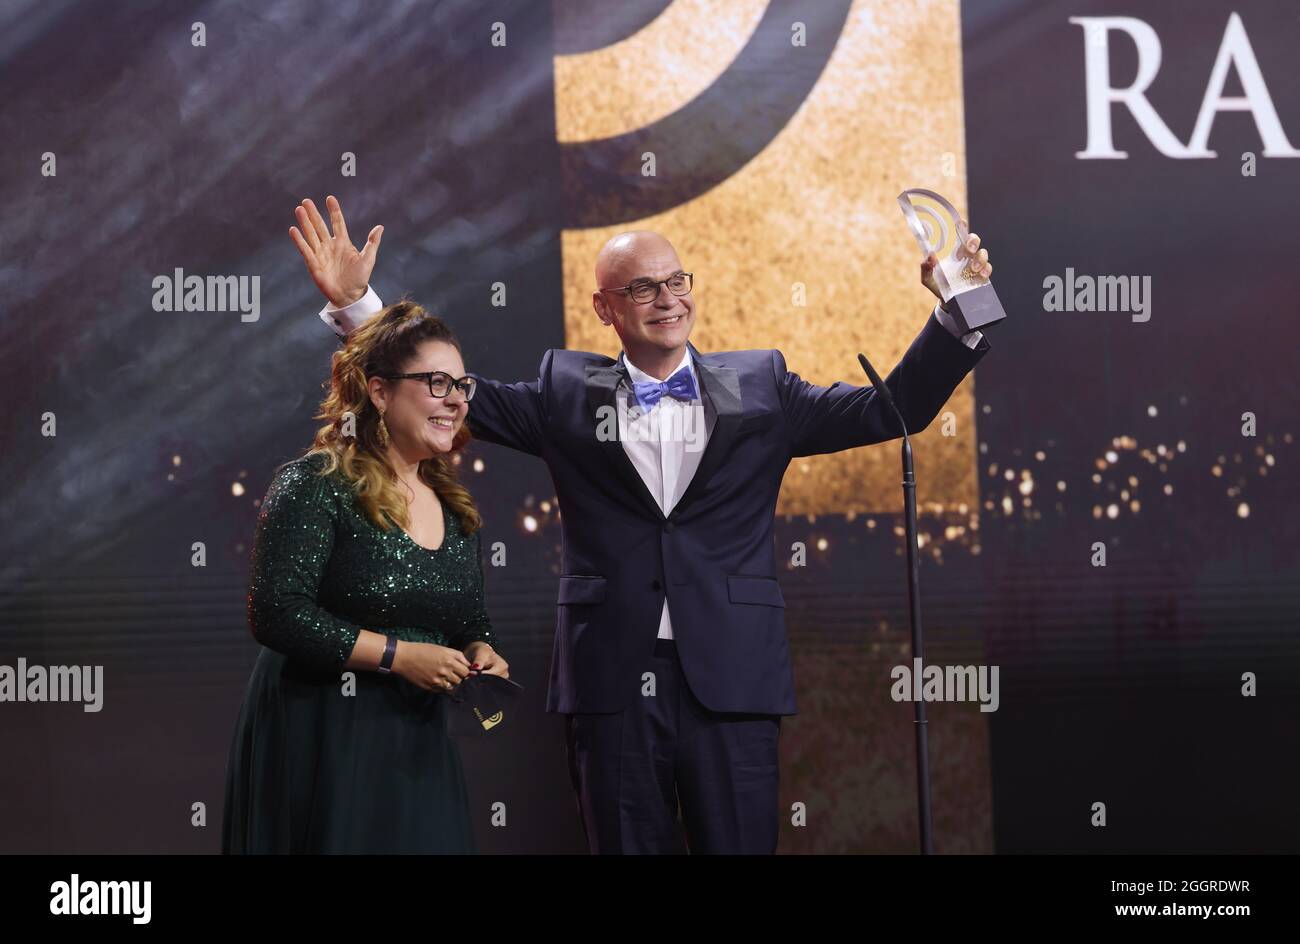 Hamburg, Germany. 02nd Sep, 2021. Steffen Lukas and Claudia Switala from RADIO  PSR are on stage at the German Radio Awards 2021 and are happy about the  award for "Best Morning Show"